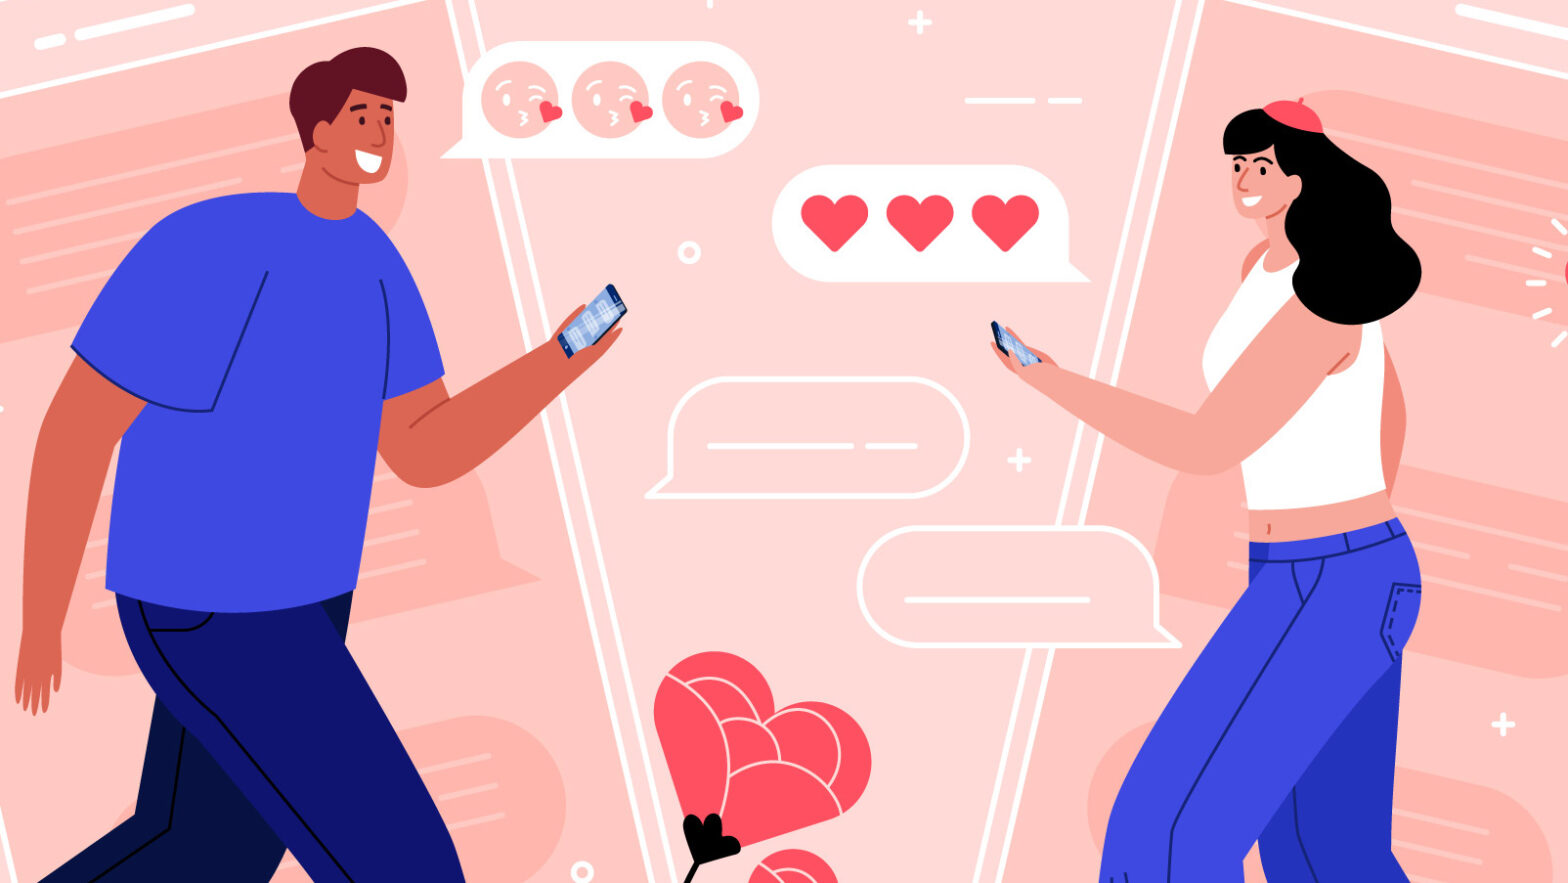 Online Dating and the role of dating apps